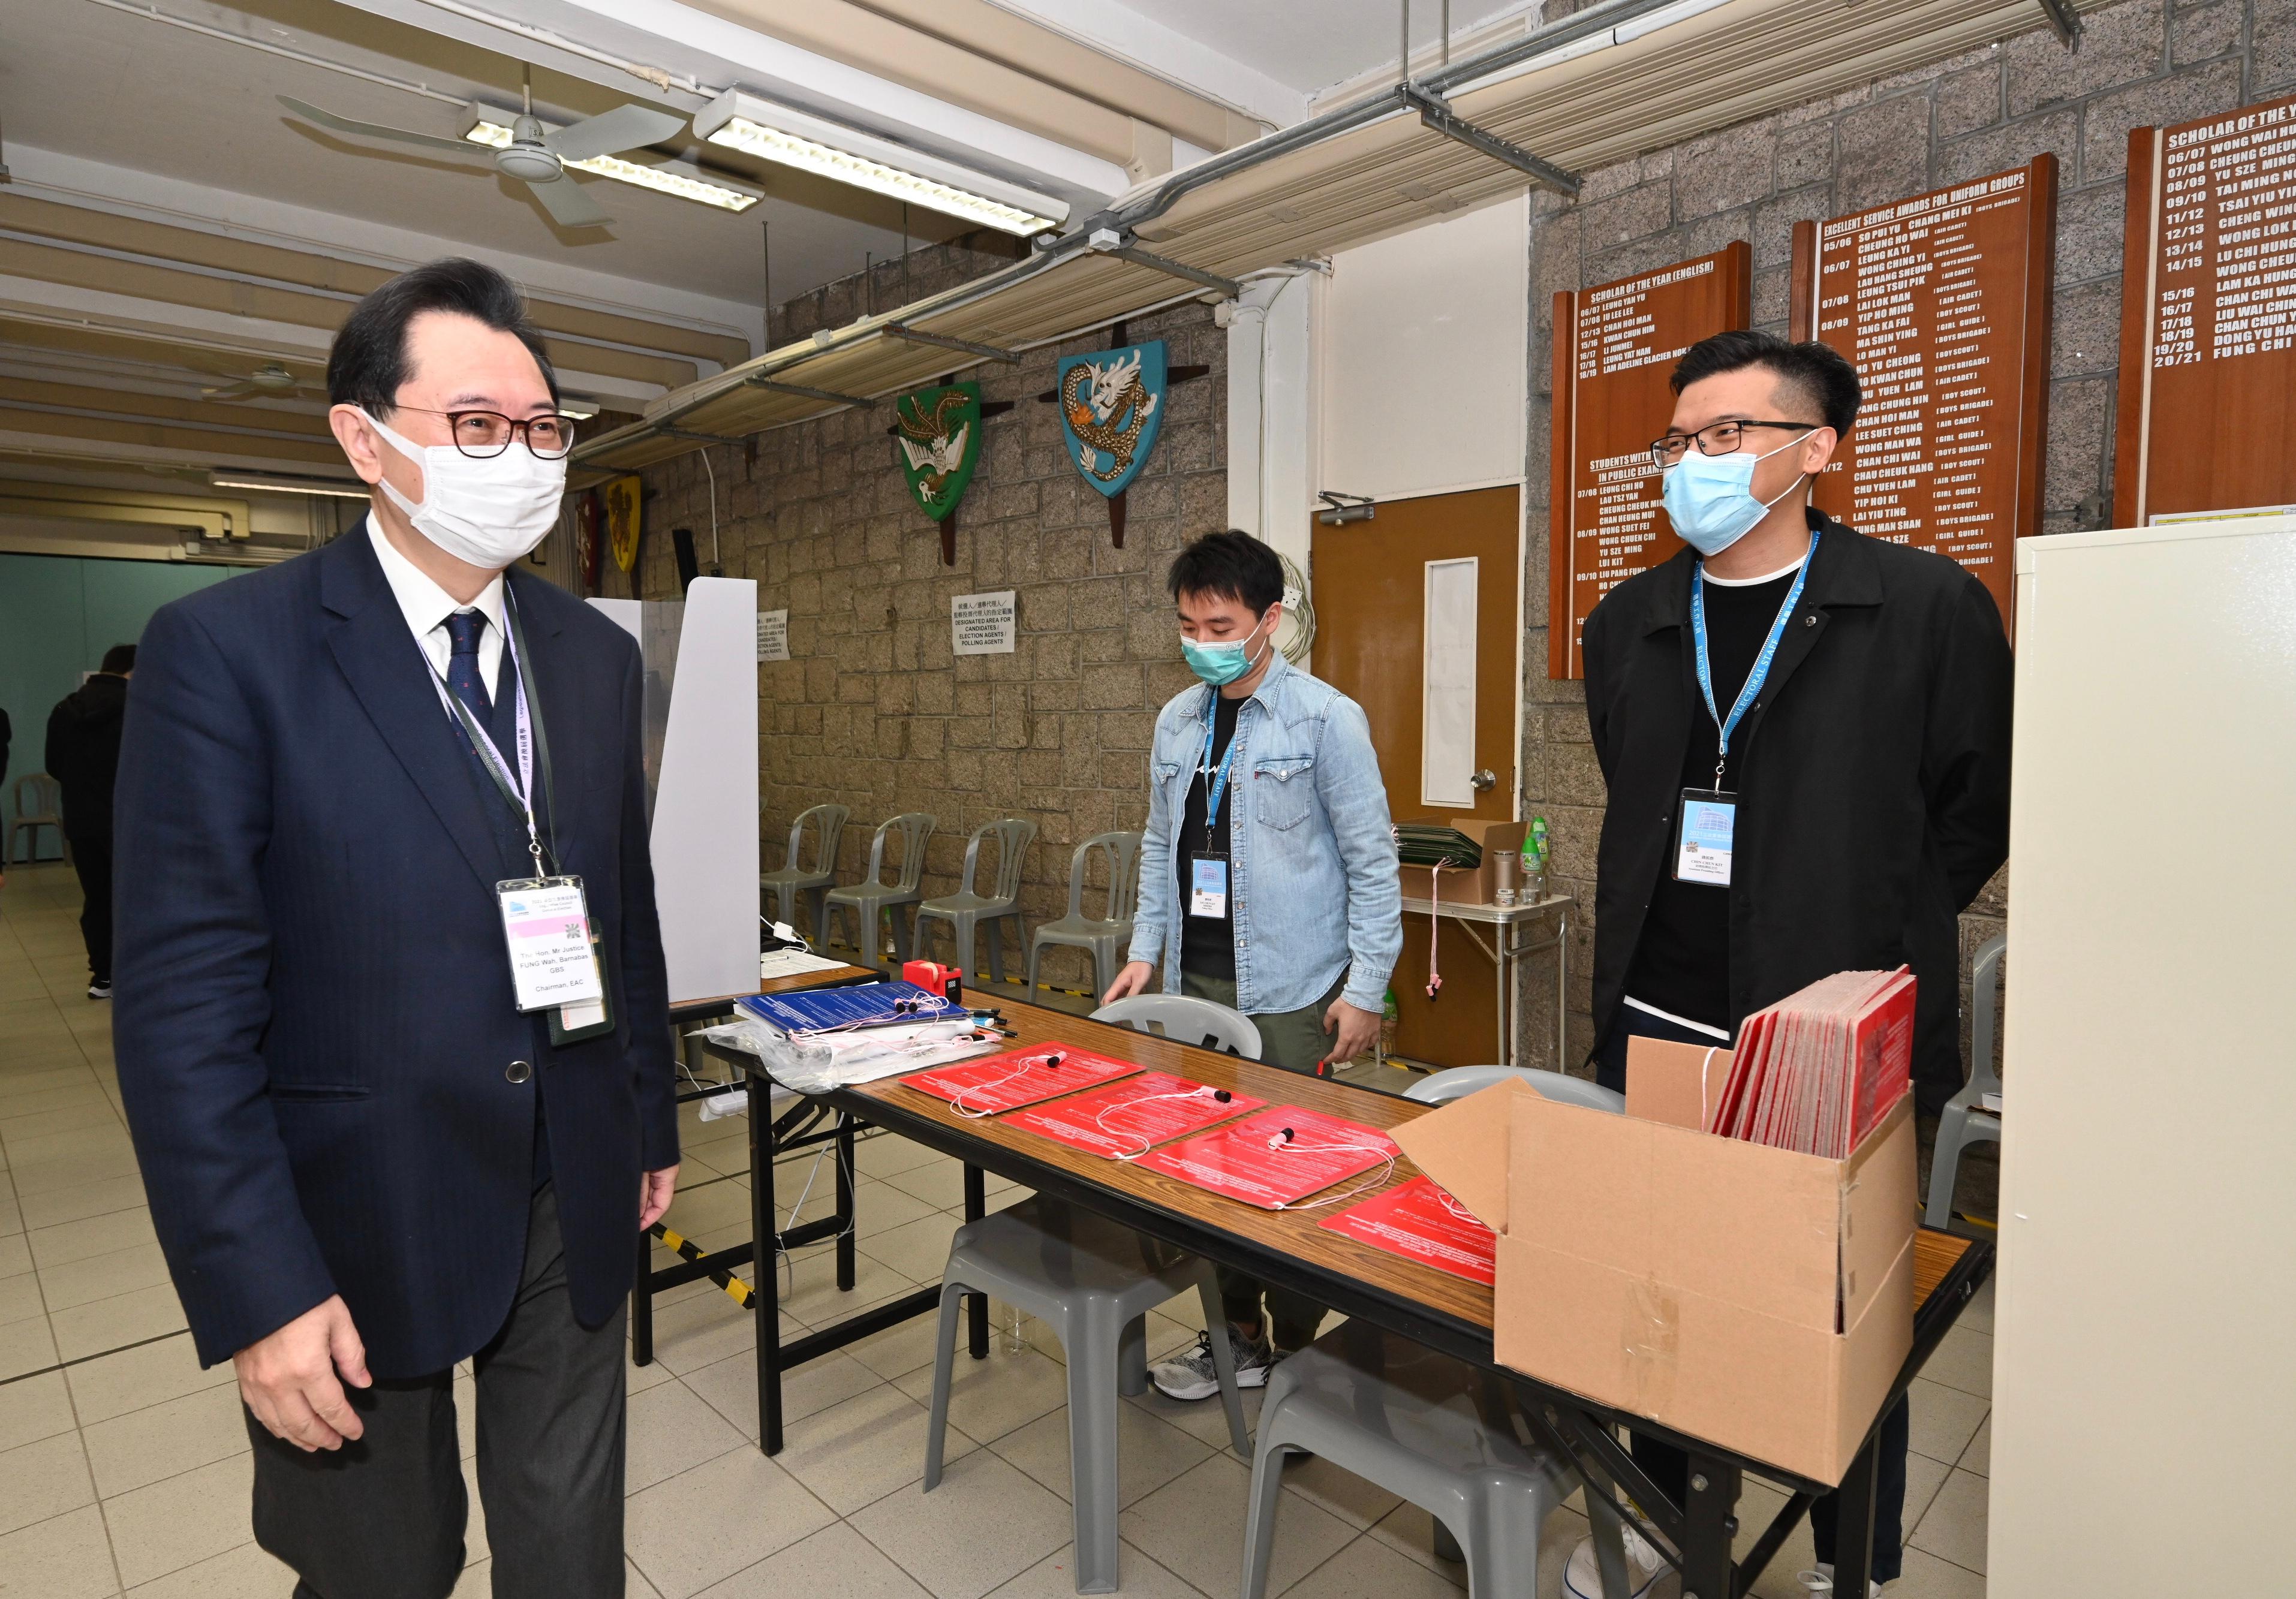 The Chairman of the Electoral Affairs Commission, Mr Justice Barnabas Fung Wah (left) visits the polling station at Jockey Club Government Secondary School today (December 19) to inspect the operation of the polling station of the 2021 Legislative Council General Election.